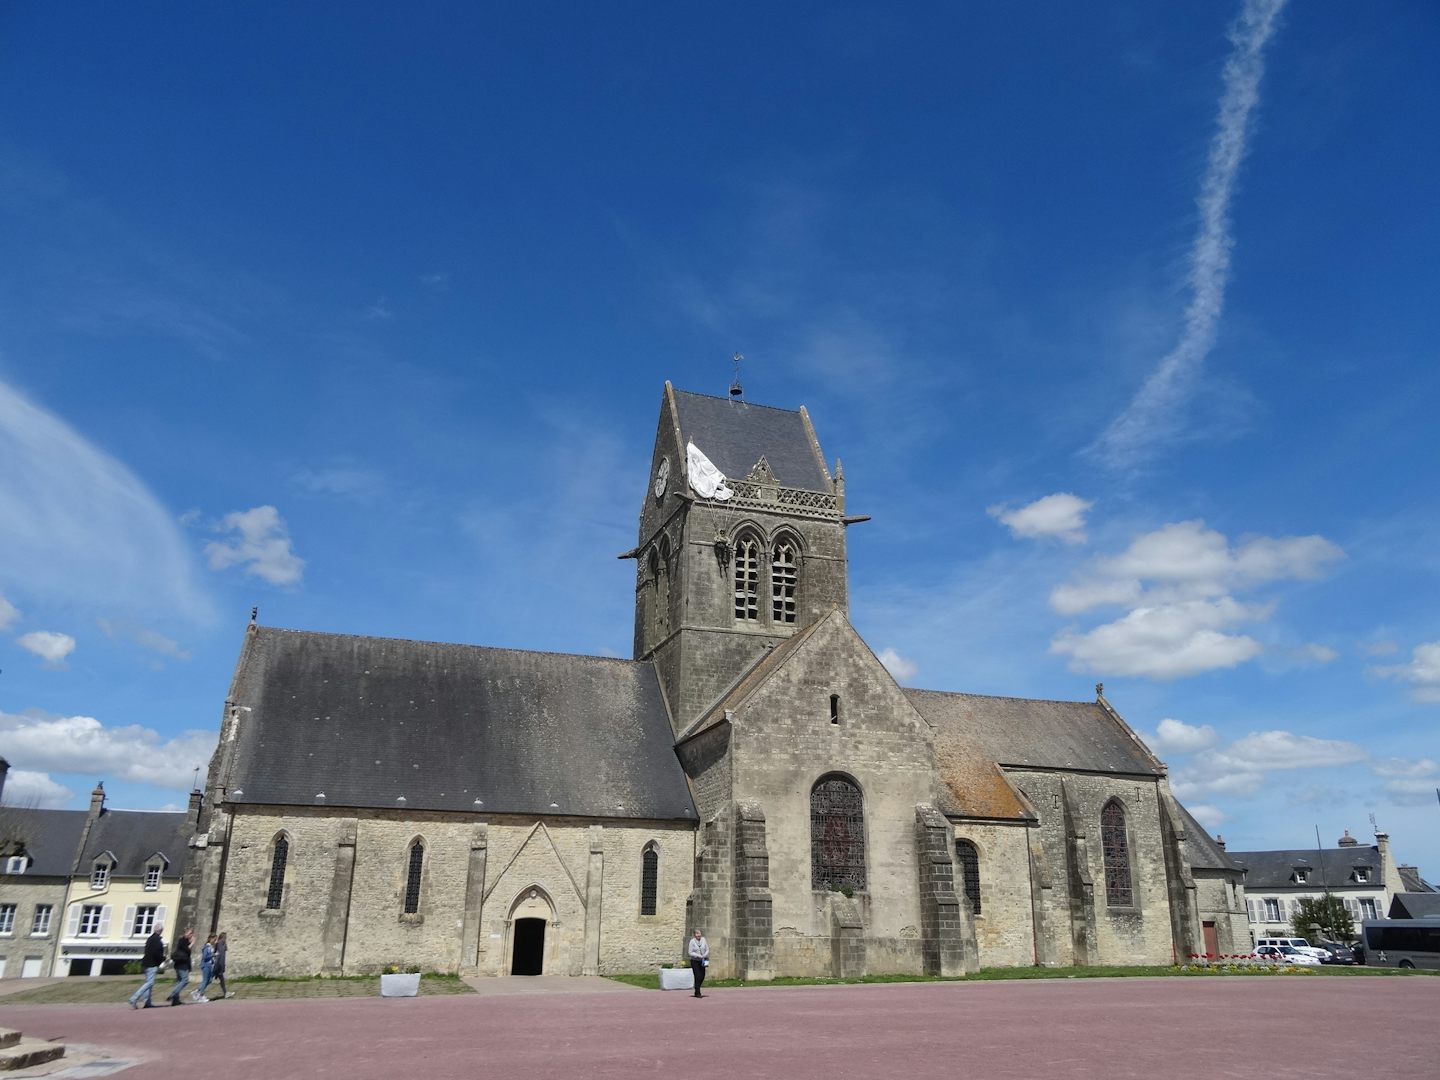 Saint-Mere-Eglise in Normandy France from the movie "The Longest Day&#3